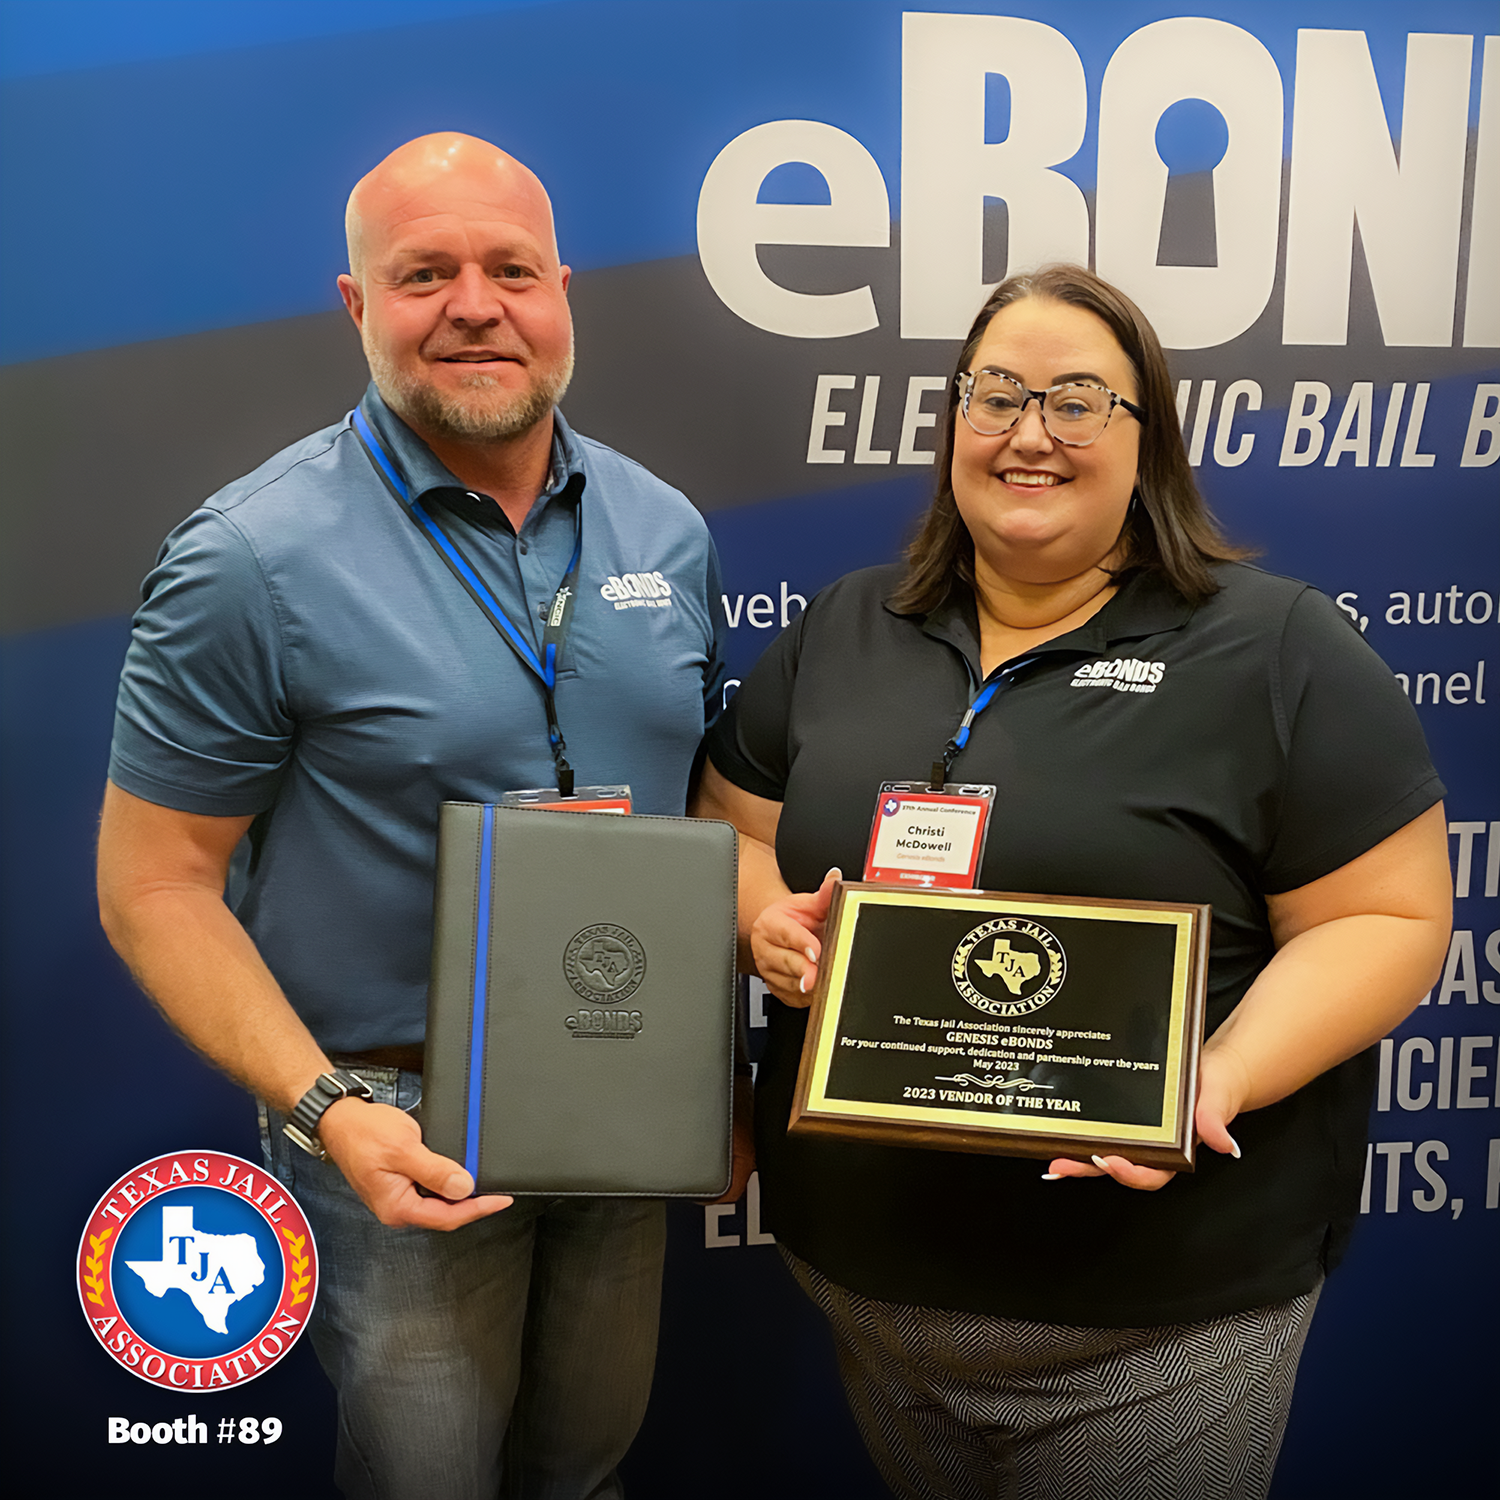 Genesis eBONDS awarded Vendor of the Year at 2023 Texas Jail Association Conference